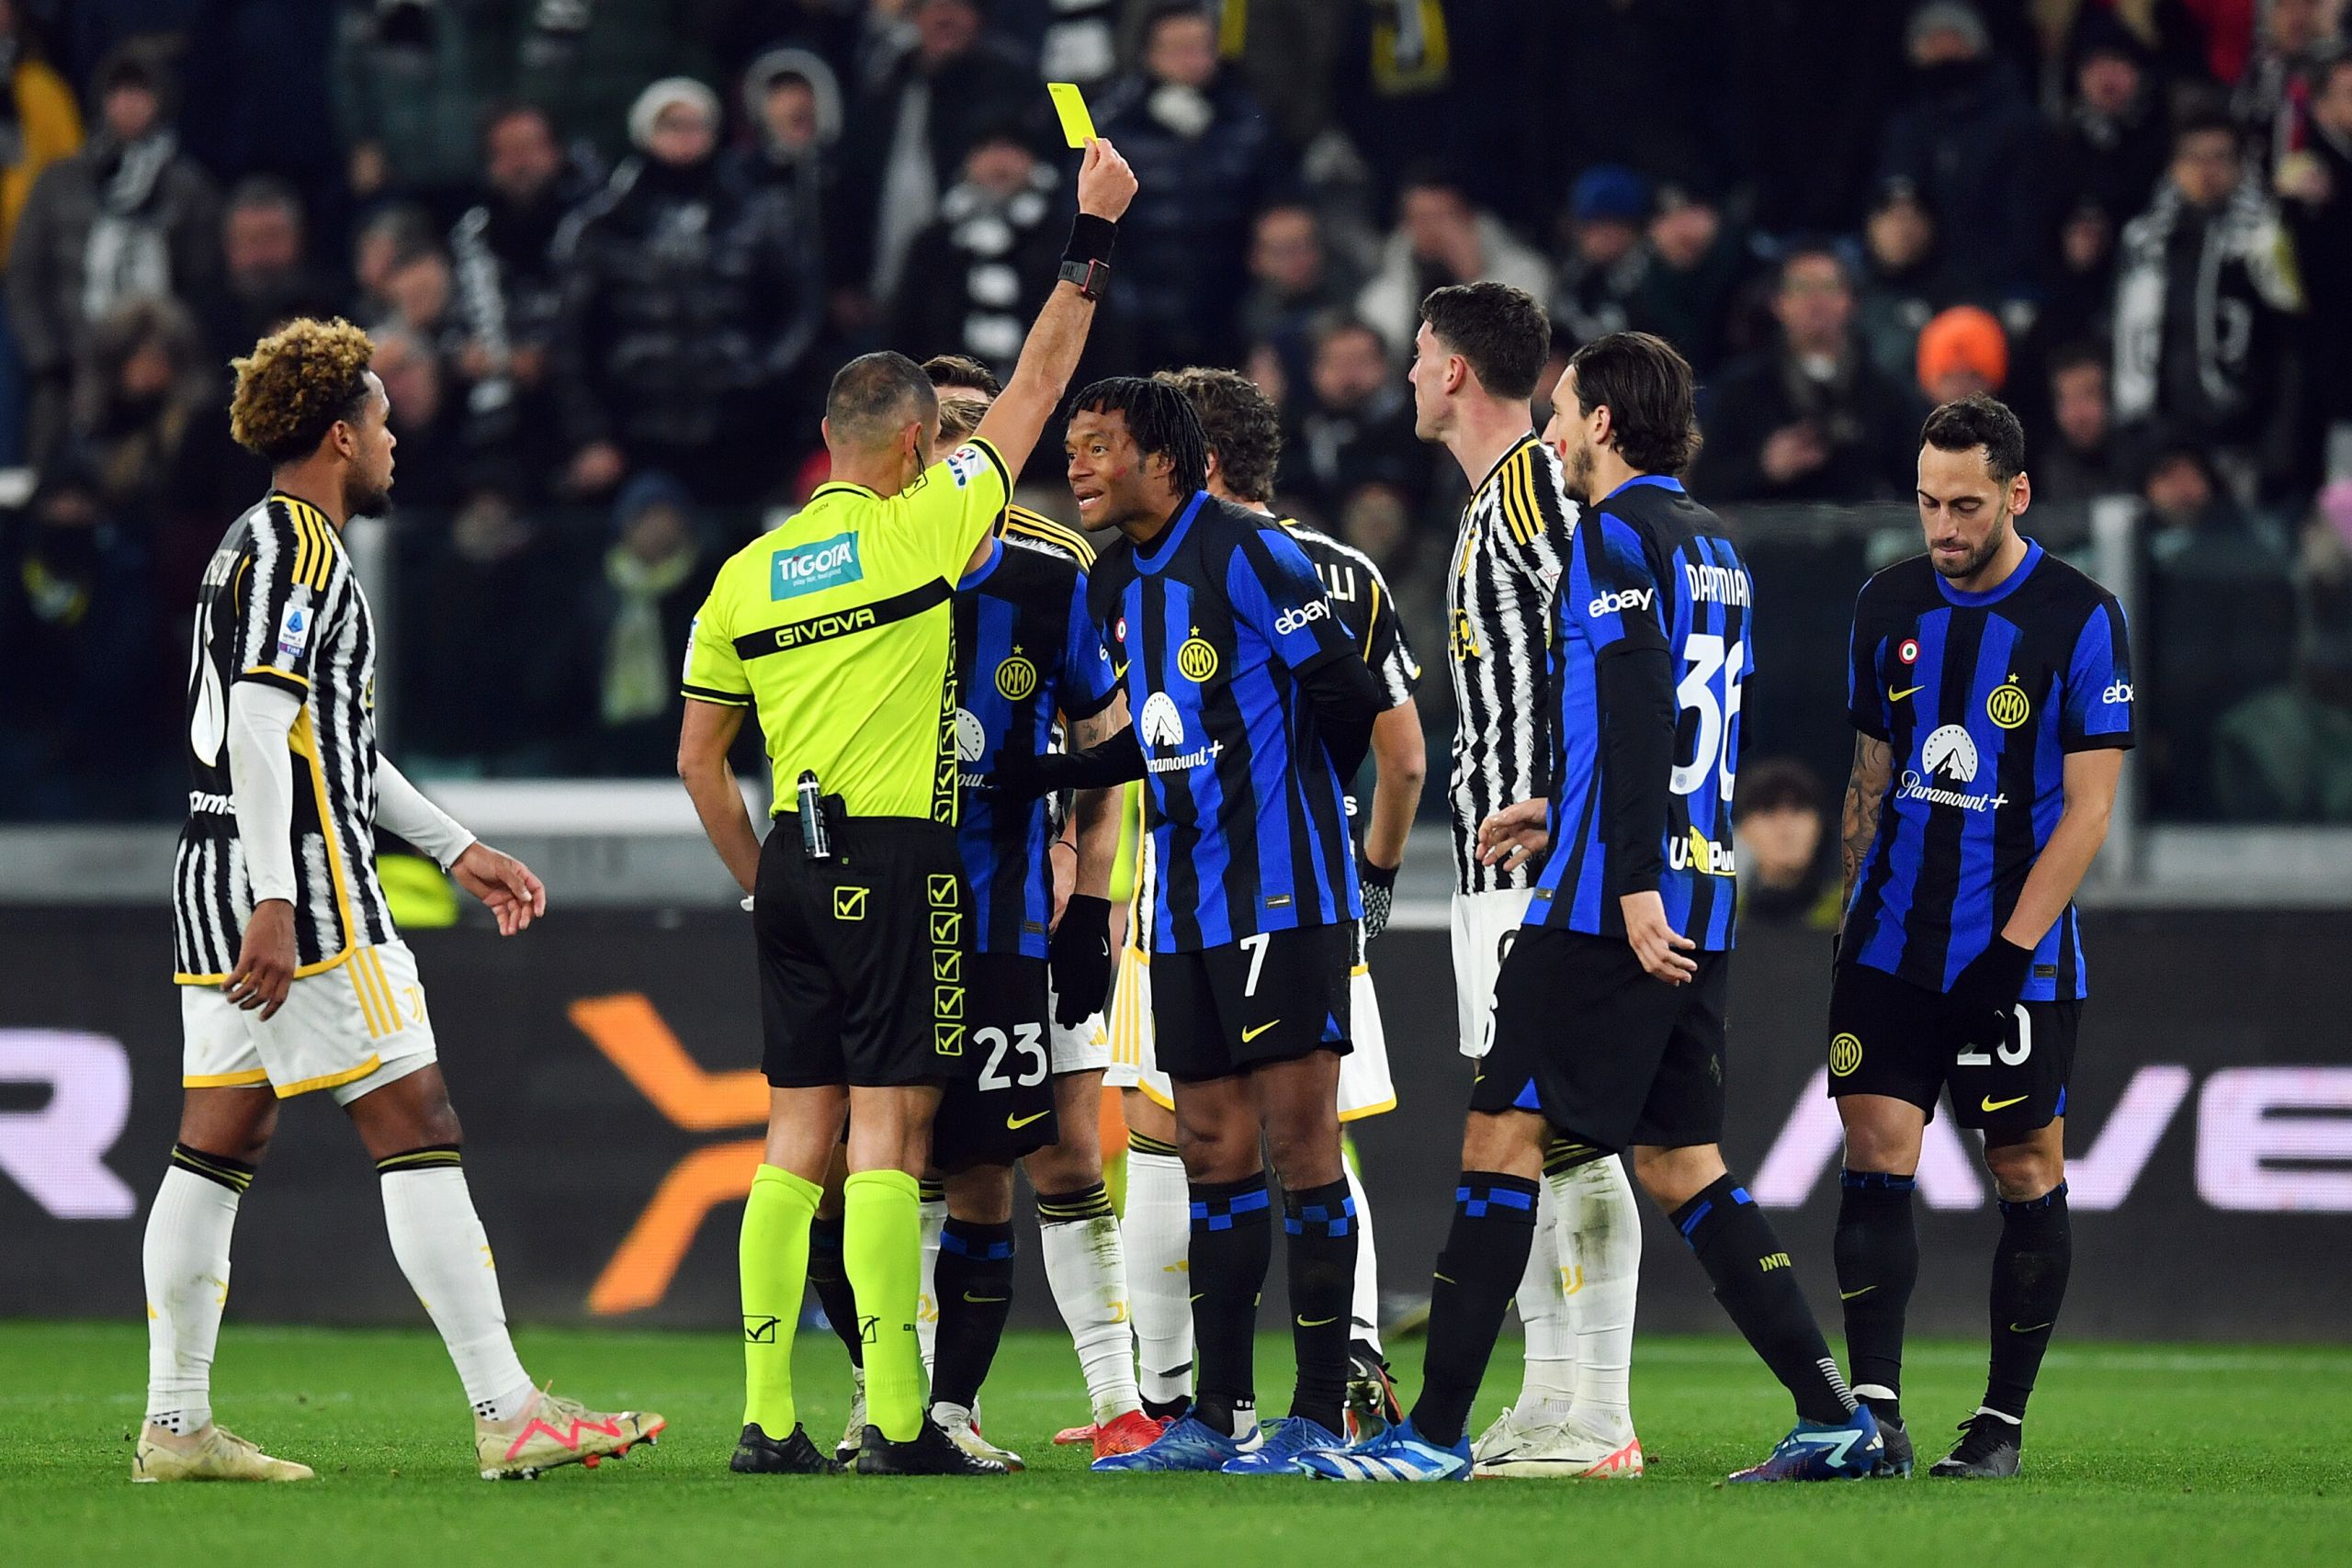 The Derby d’Italia ended in a 1-1 stalemate as Juventus and Inter hit the scorecard in the first half before cancelling each other in the second period